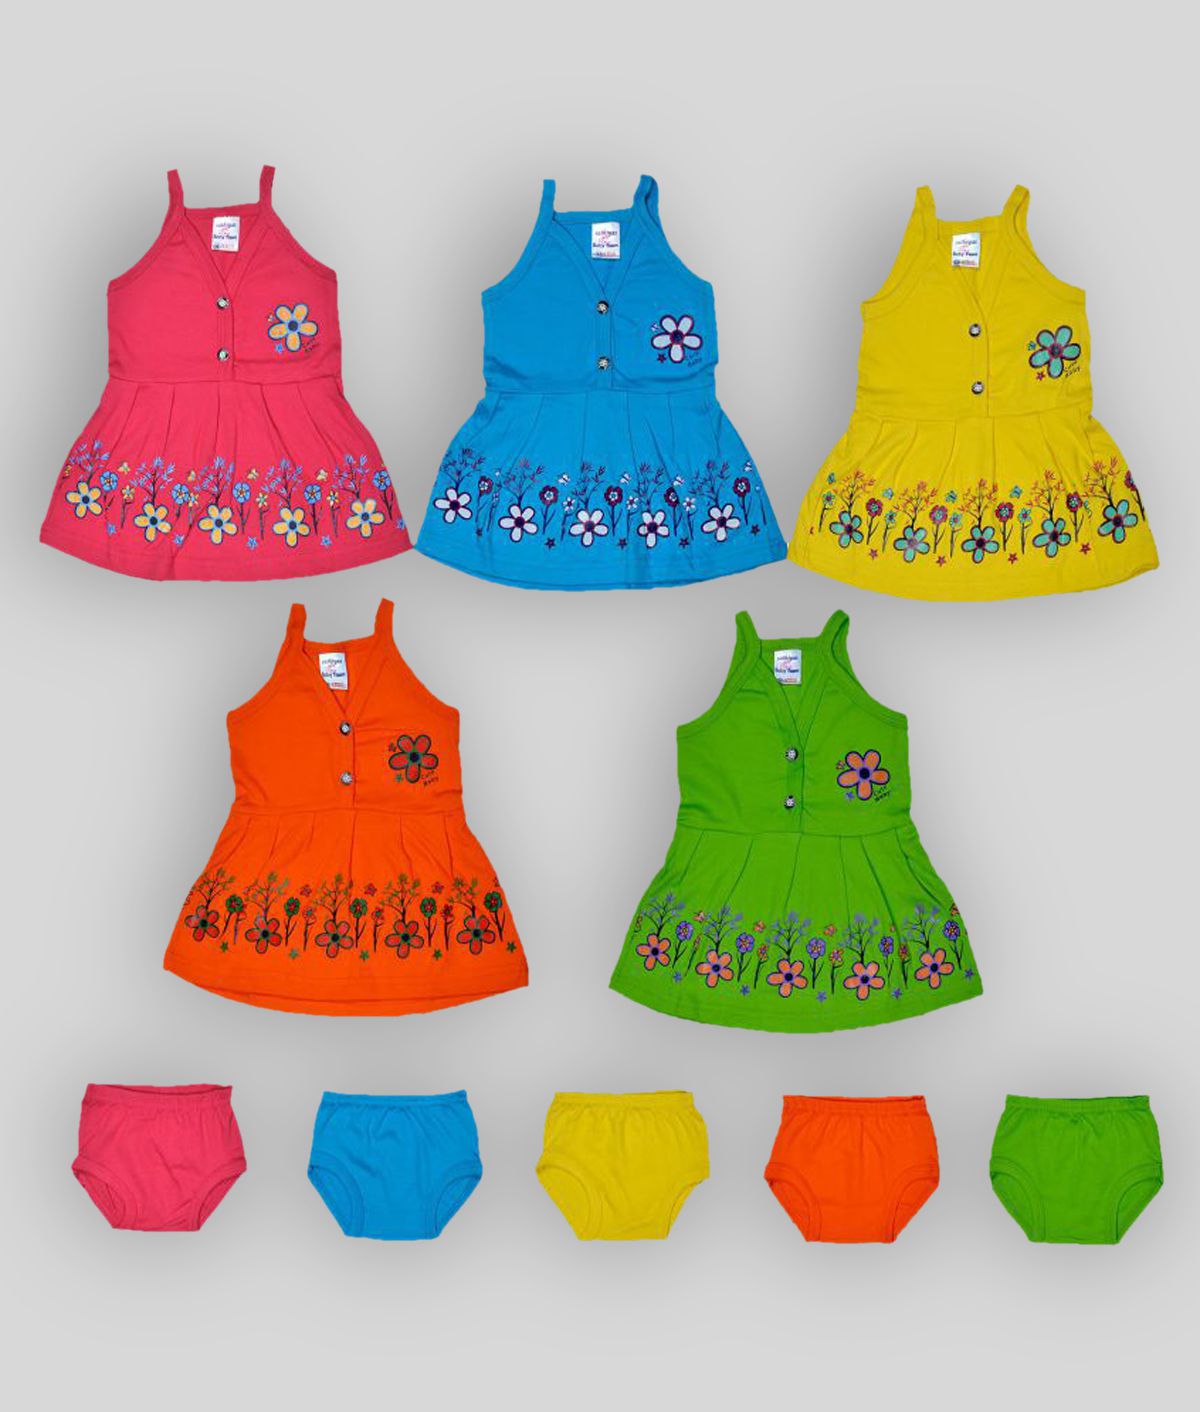     			Sathiyas Multicolour Assorted Cotton Baby Girls Dresses - Pack of 5 (0-6Months)